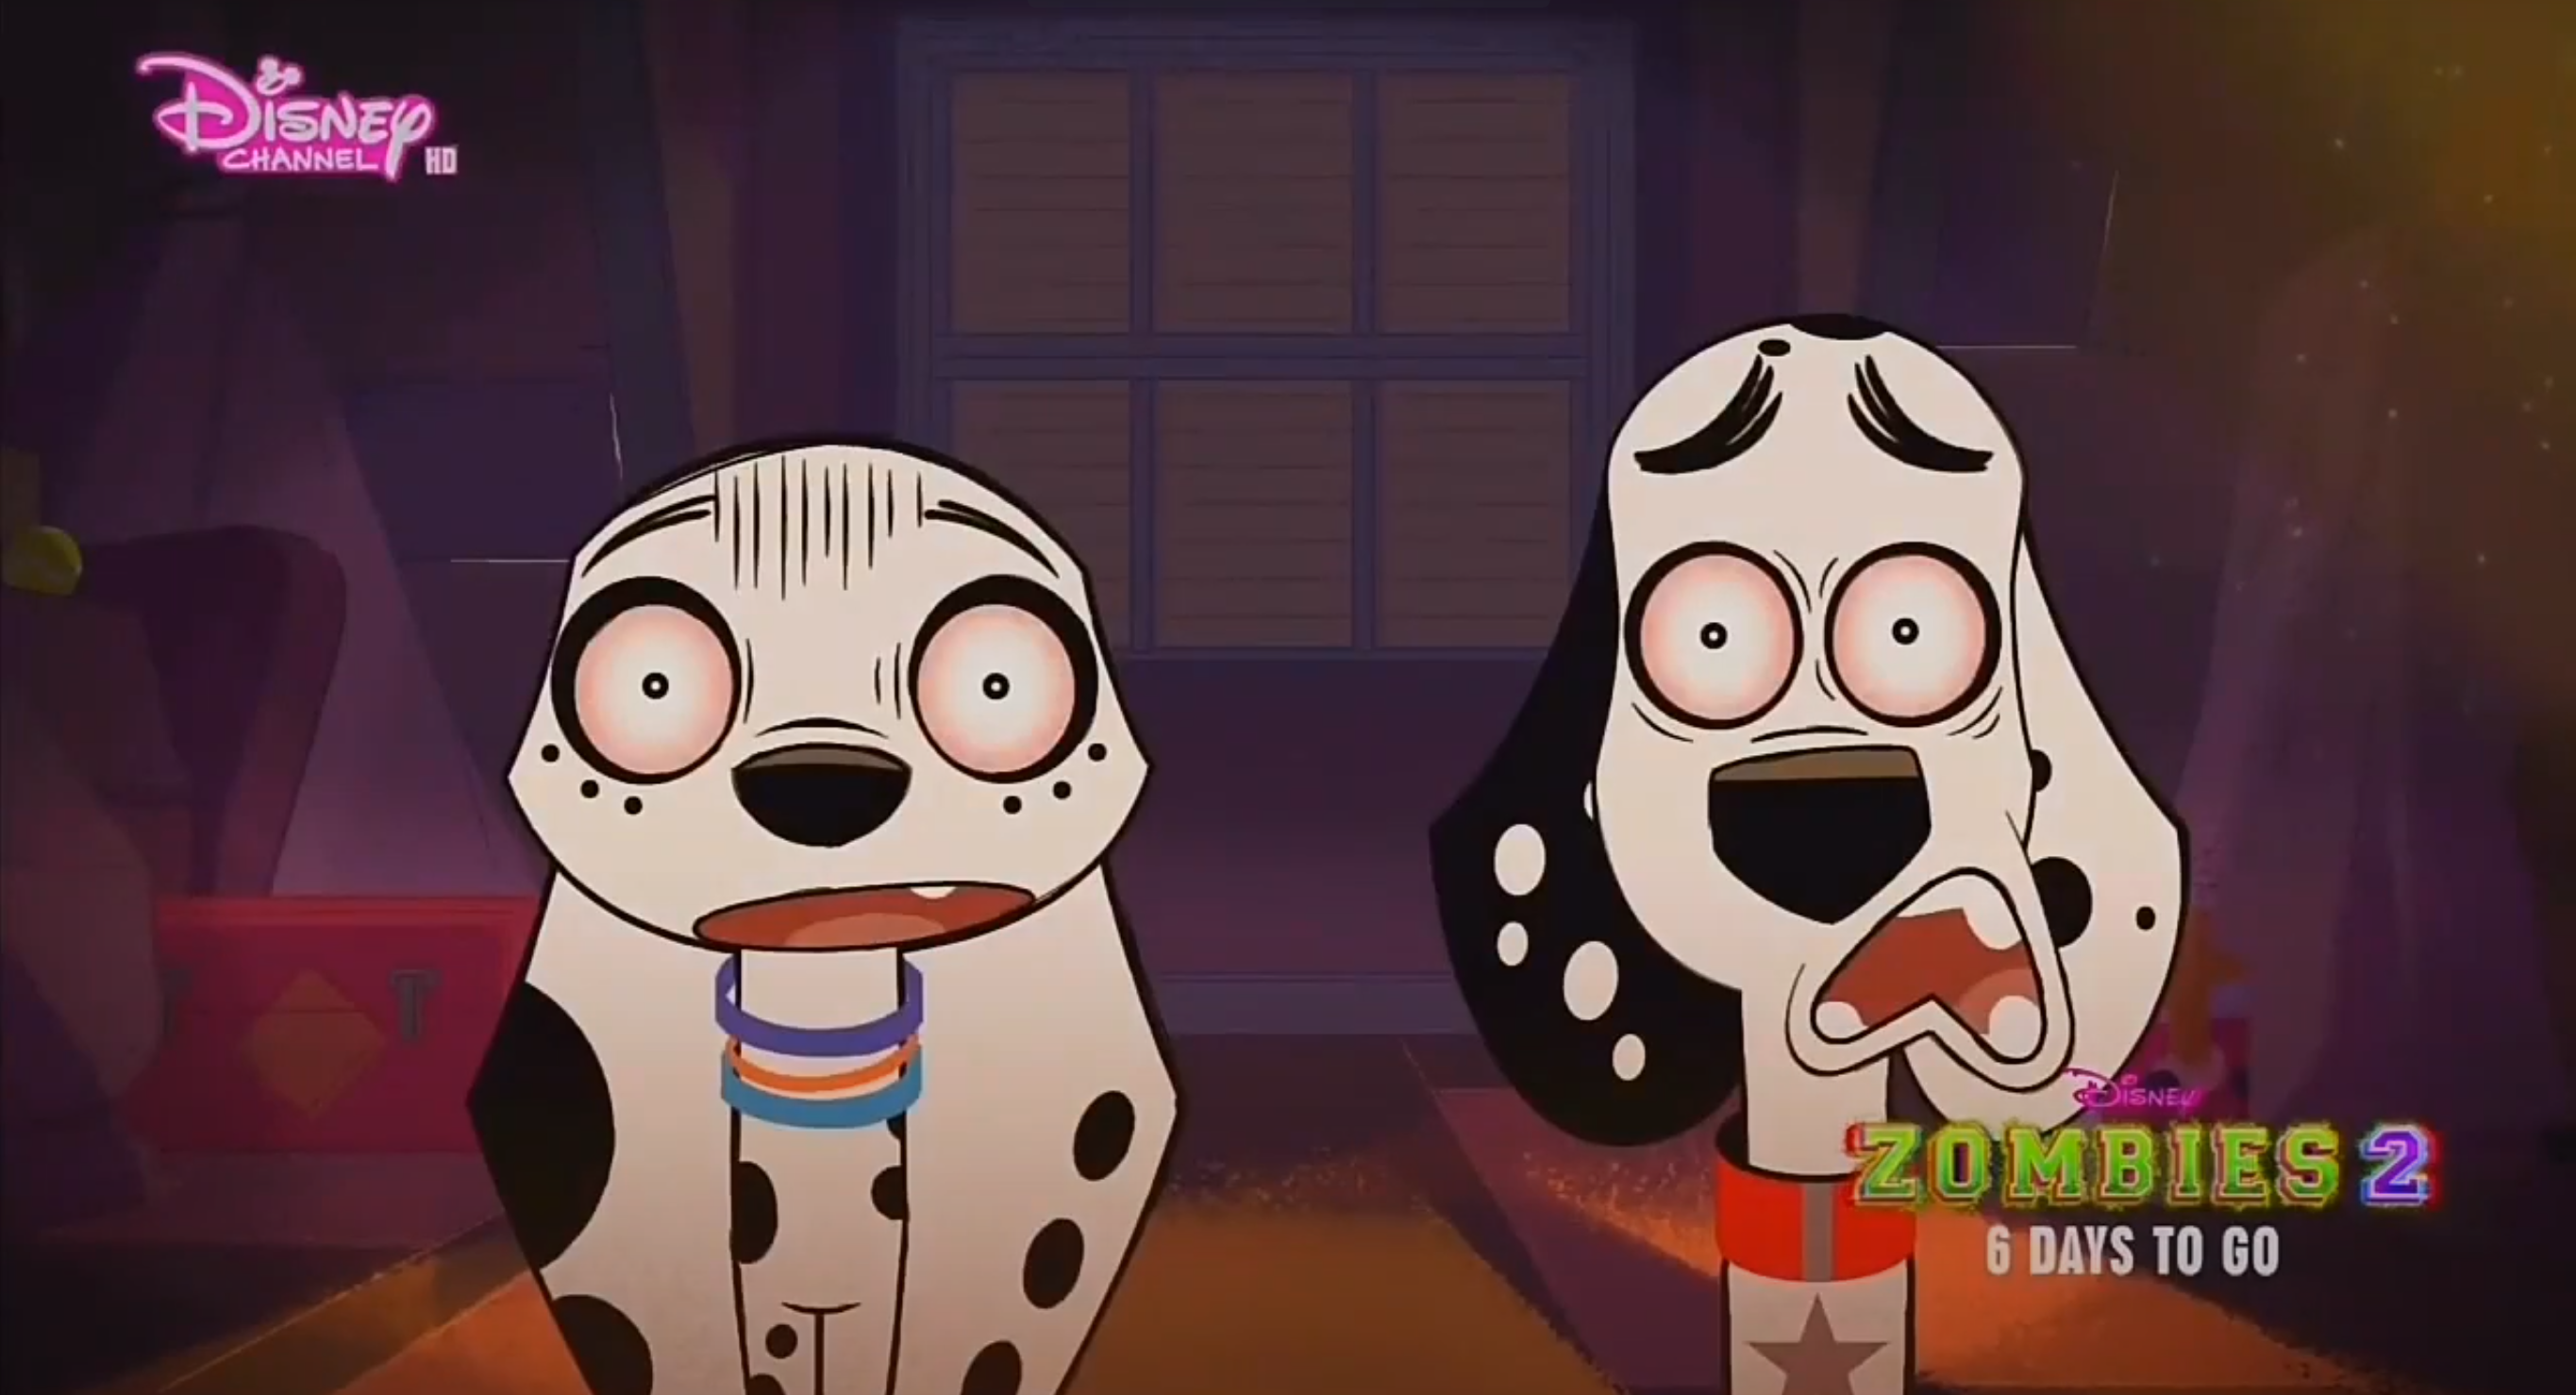 101 dalmatian street dolly and dylan